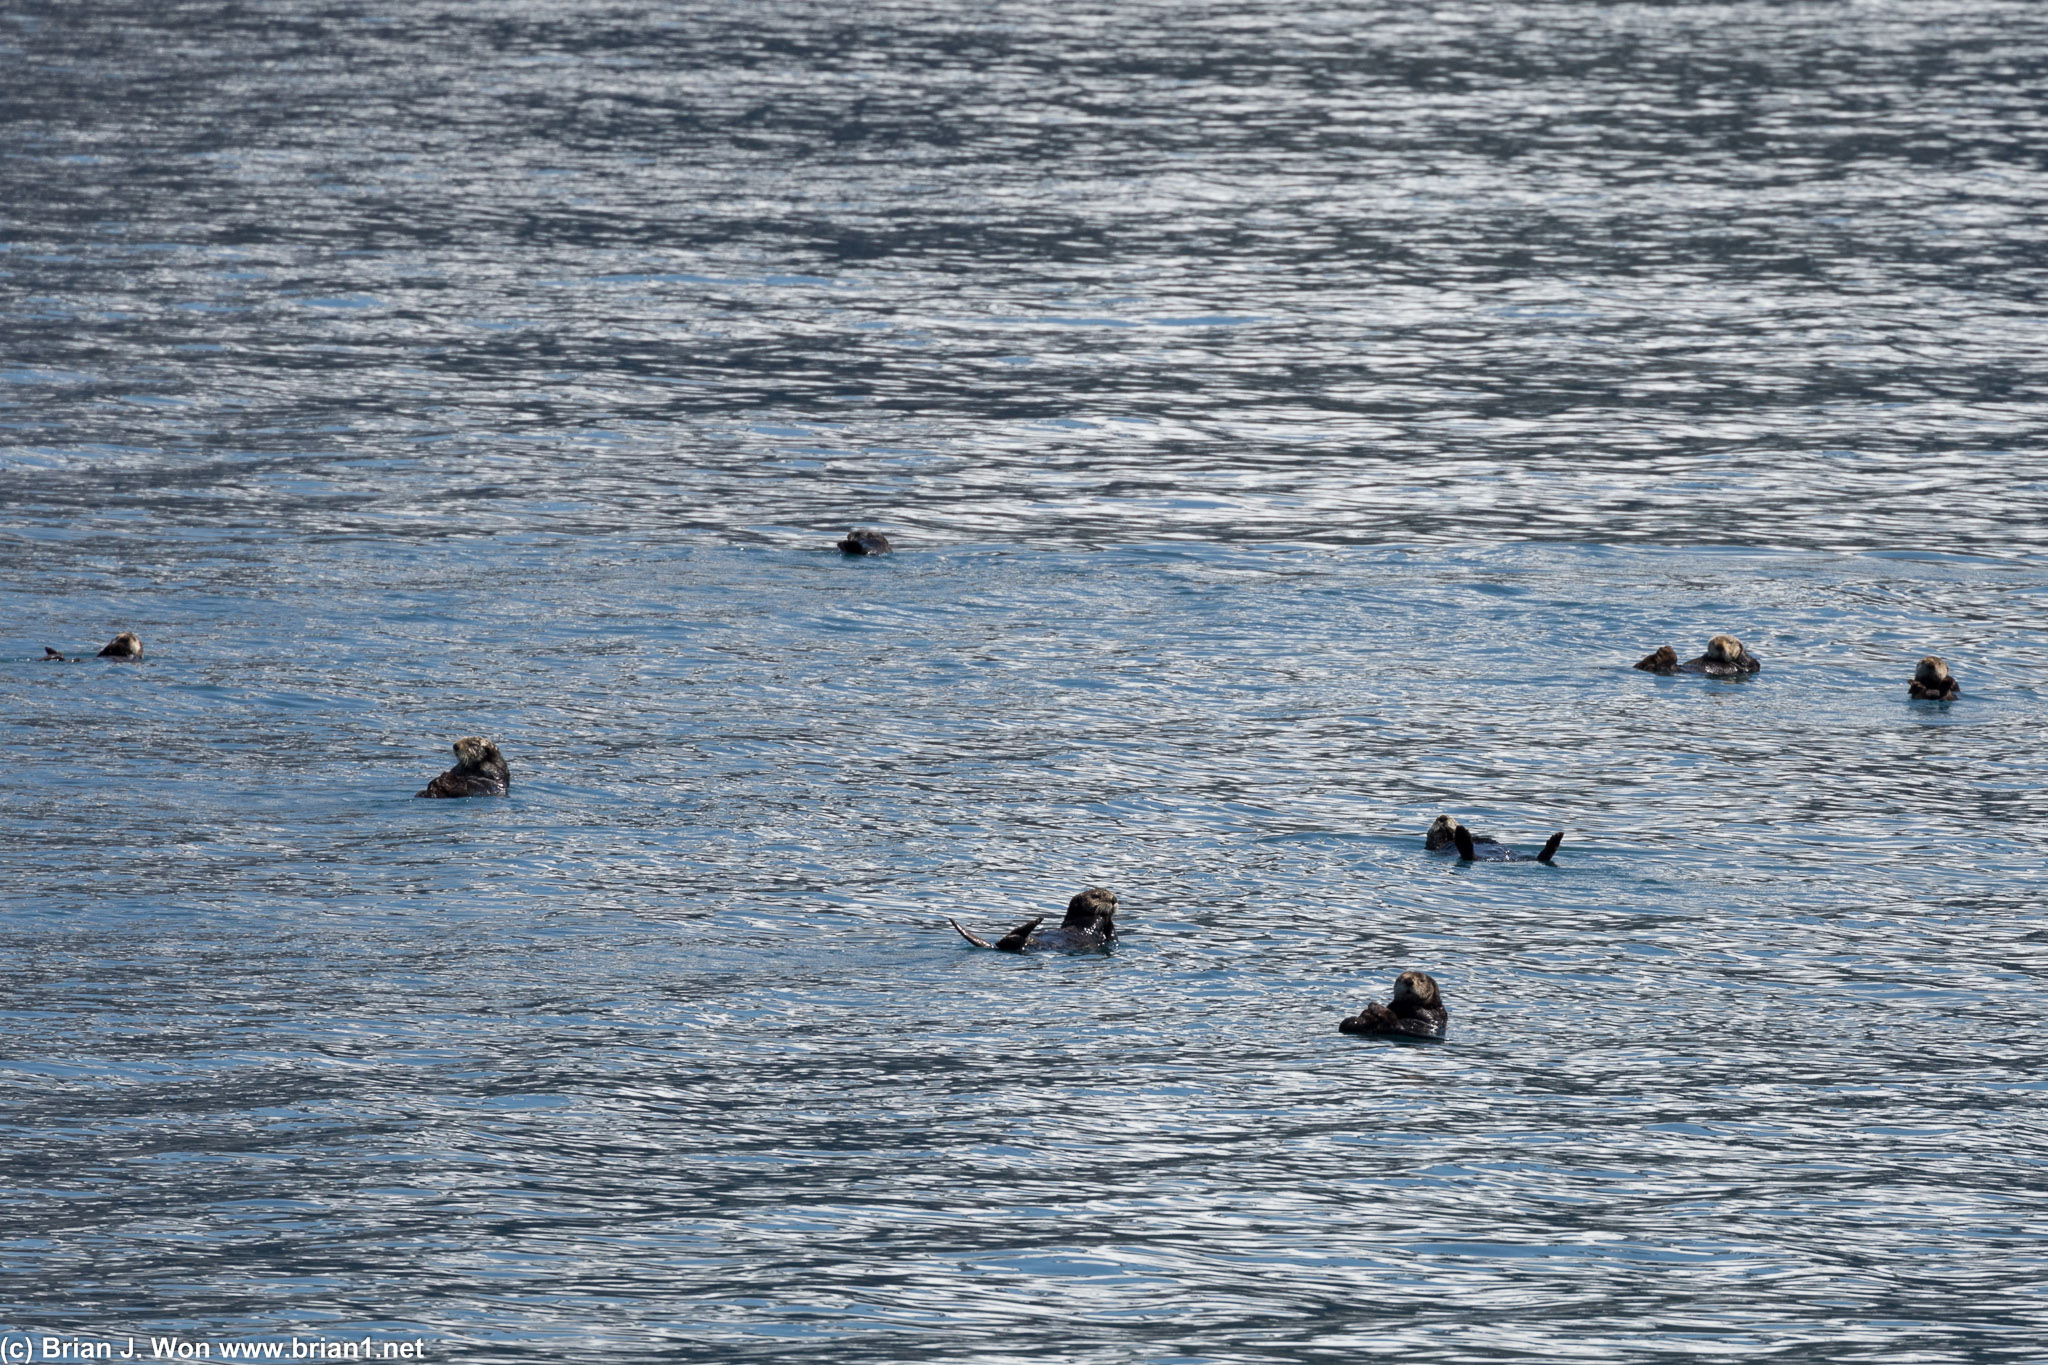 Close-up of a raft of sea otters.